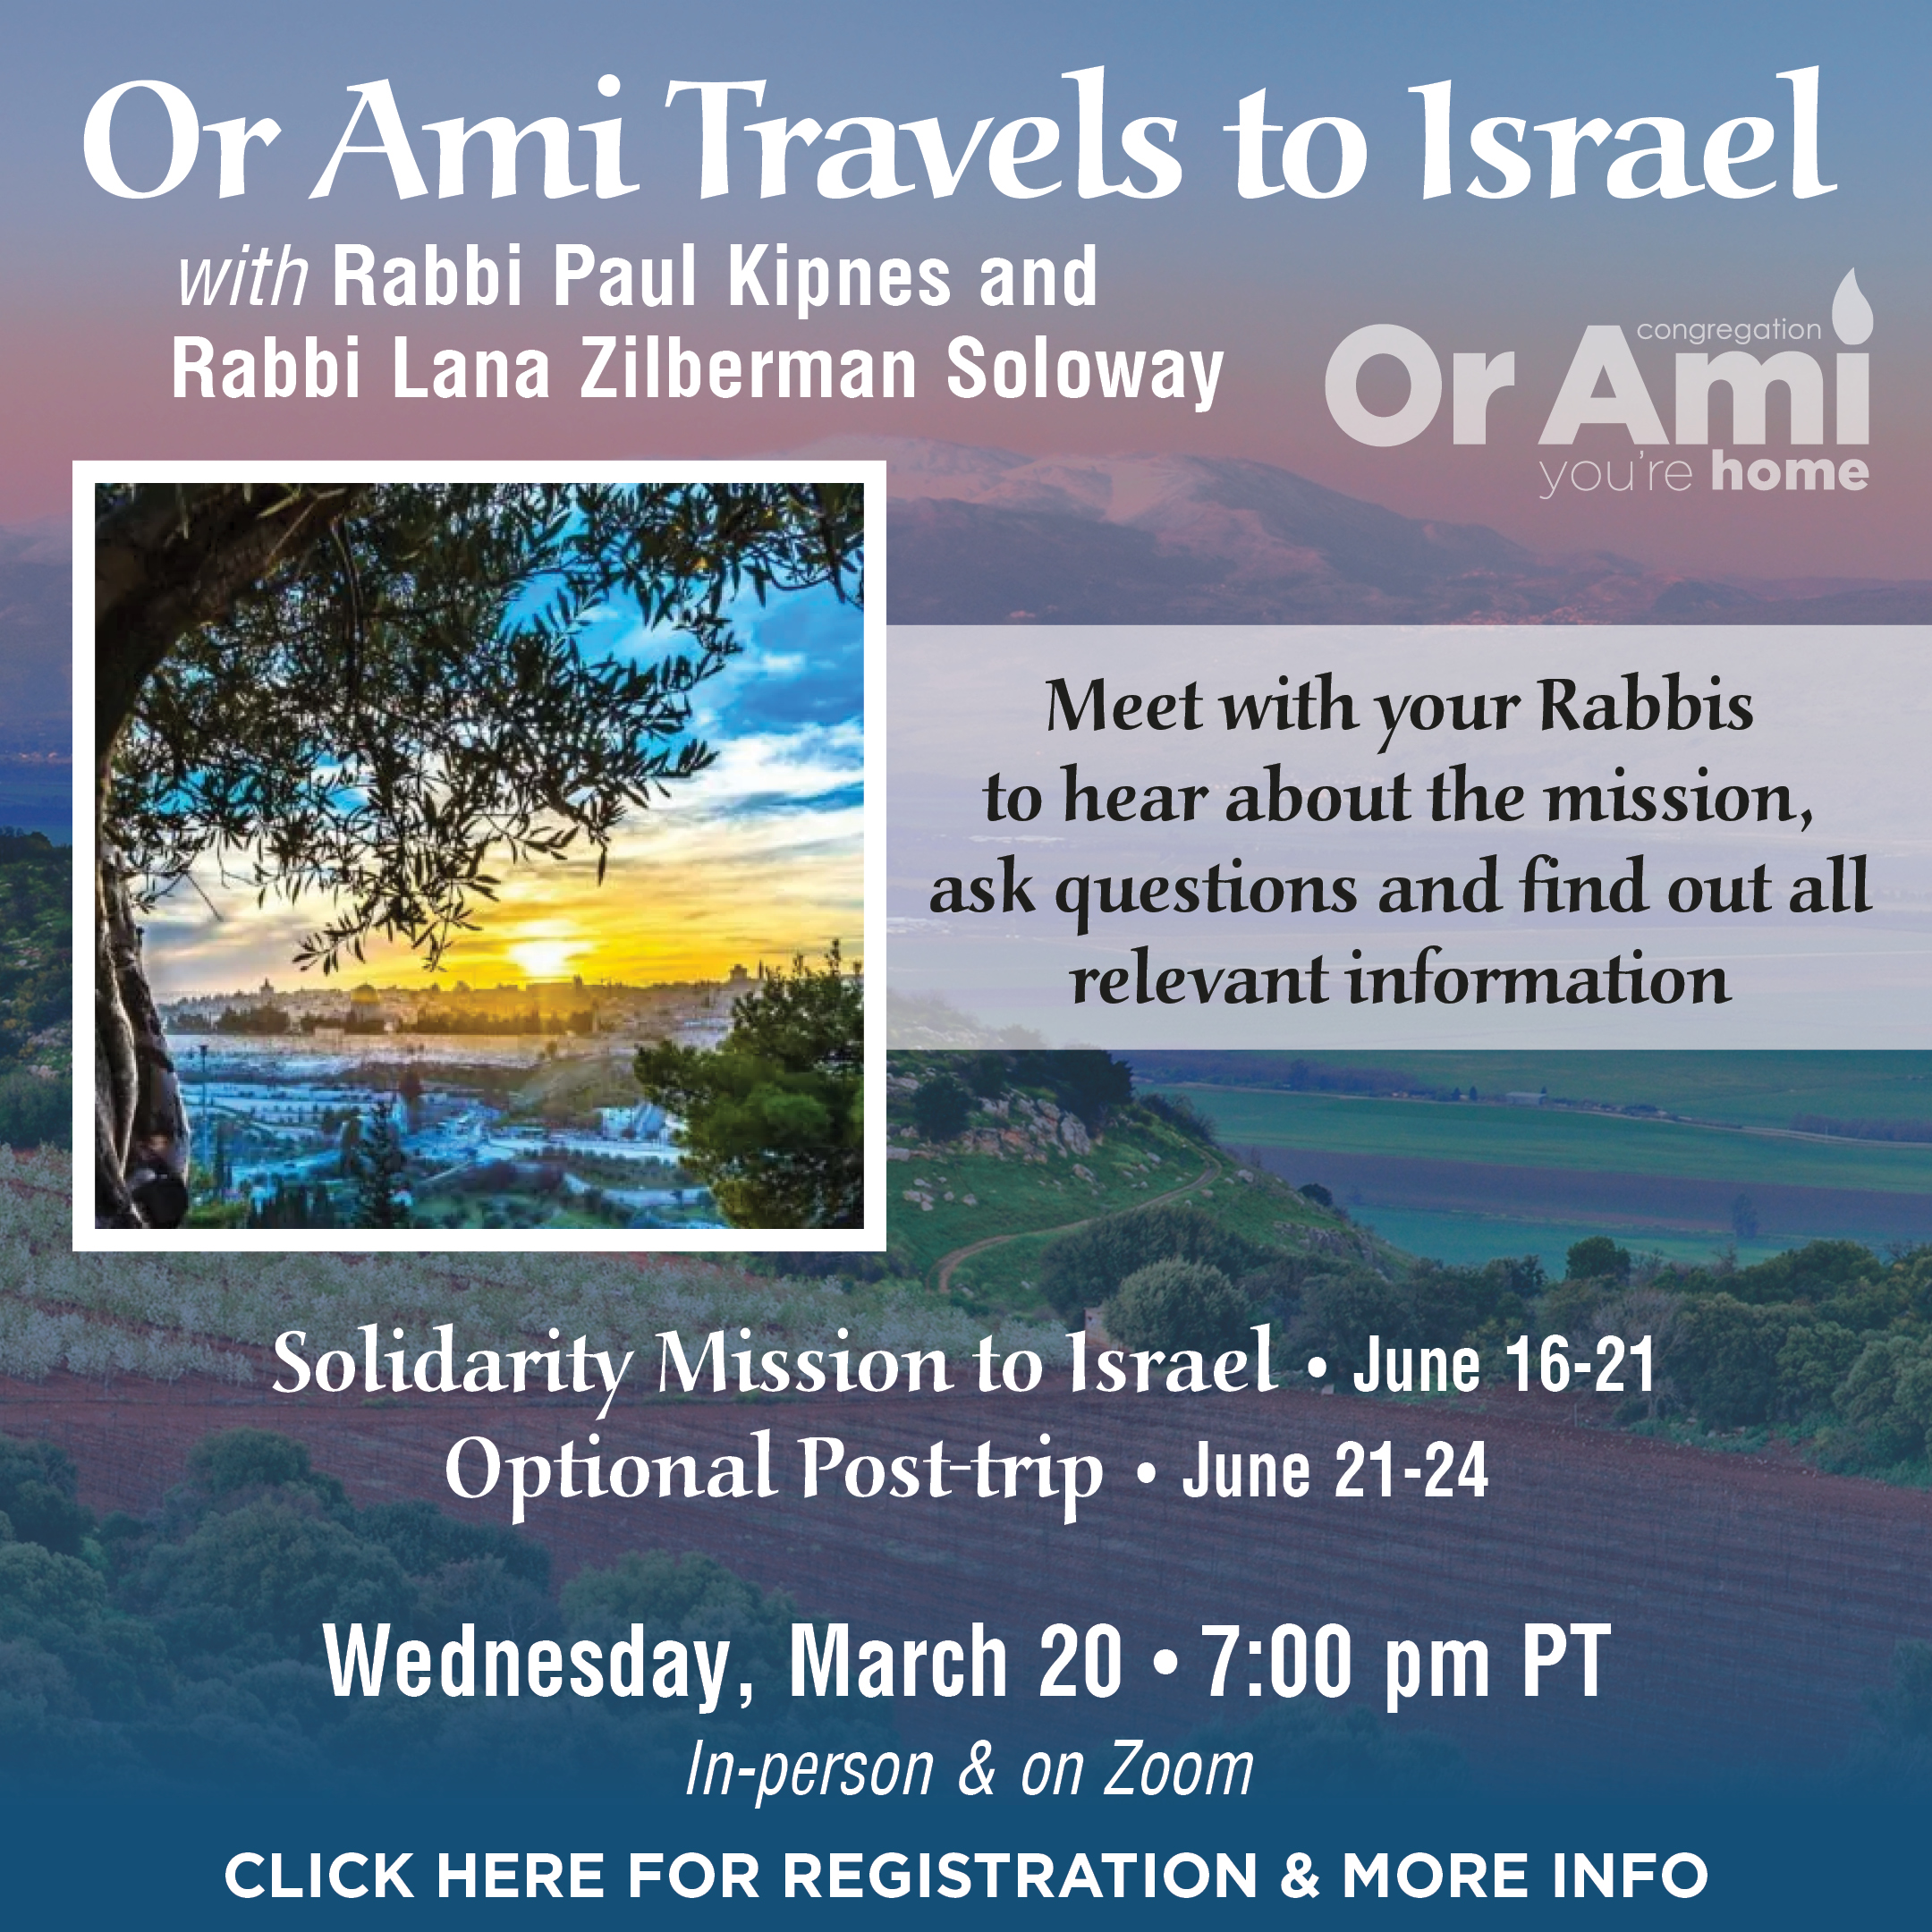 *Or Ami Travels to Israel CLICK